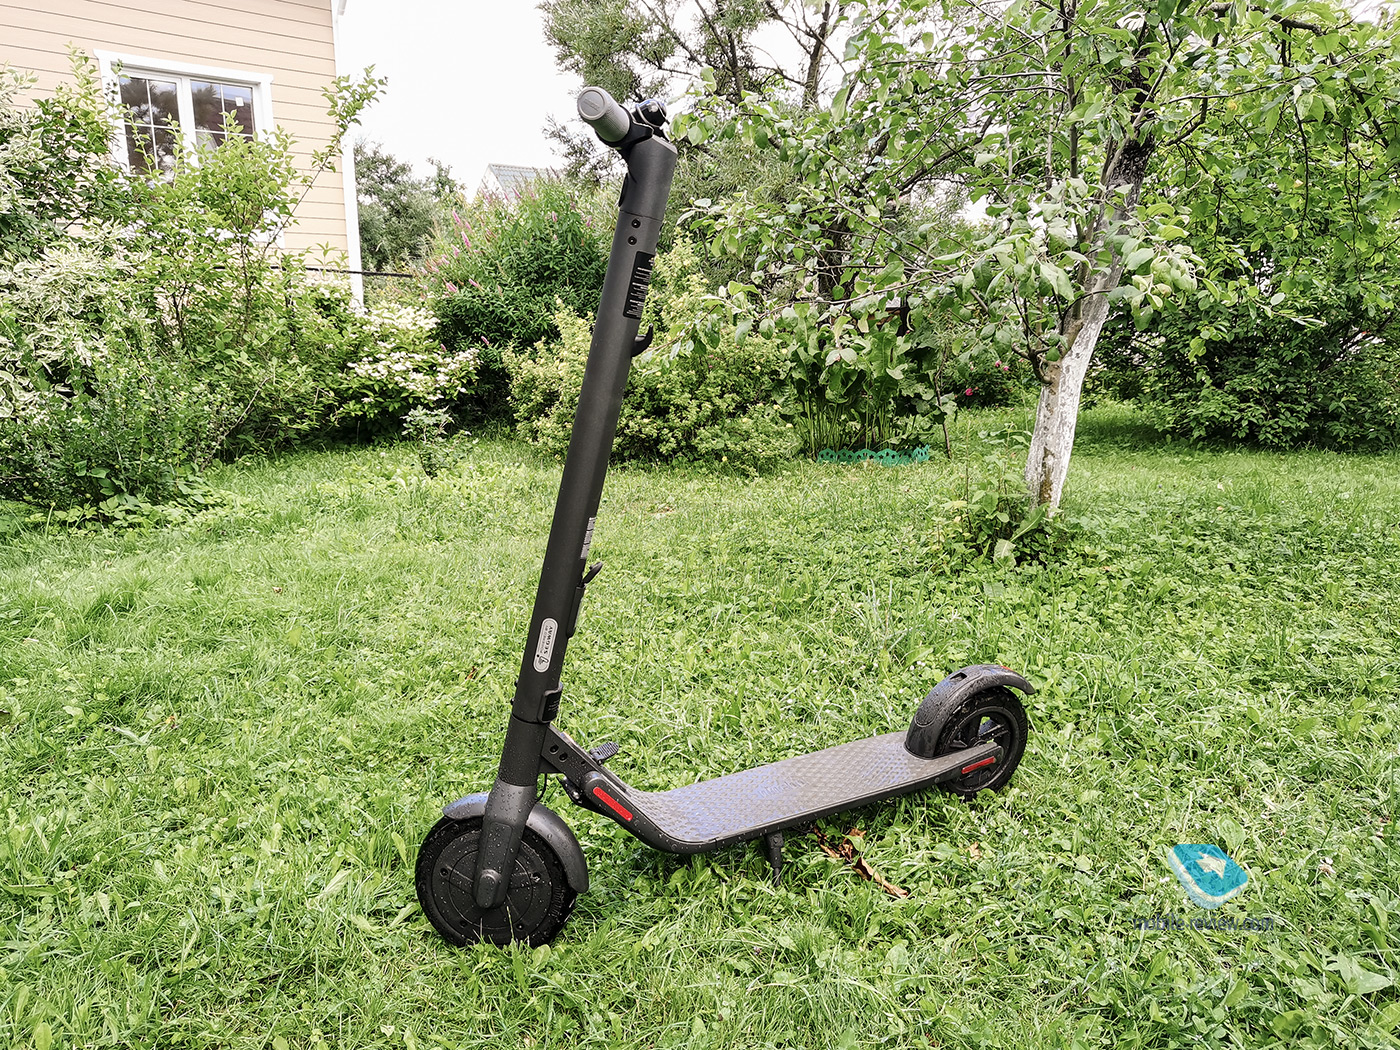 Review of the Ninebot-Segway KickScooter E22 electric scooter - post-quarantine device